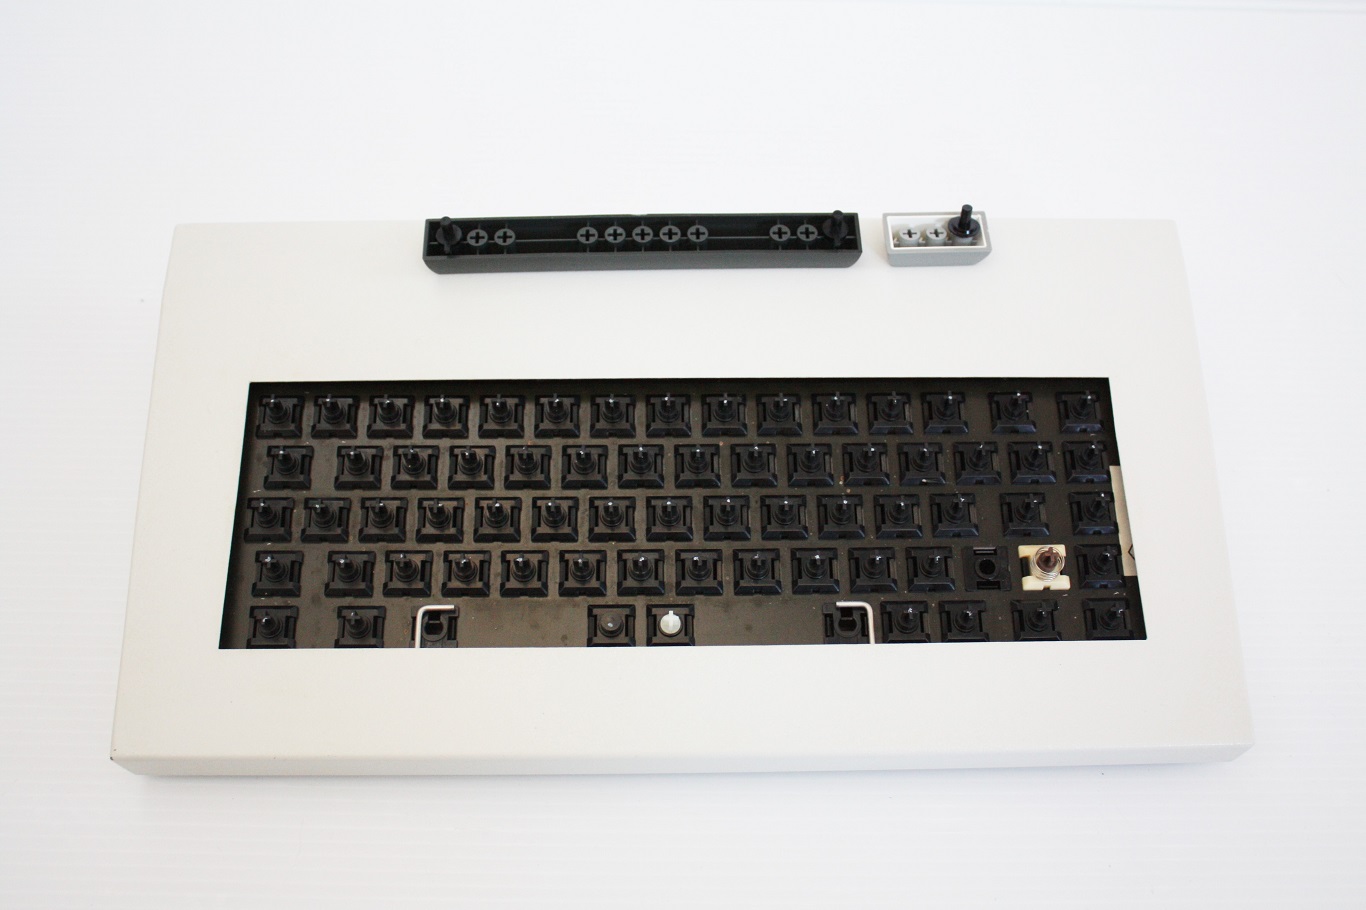 Albert computer - keyboard with key caps removed